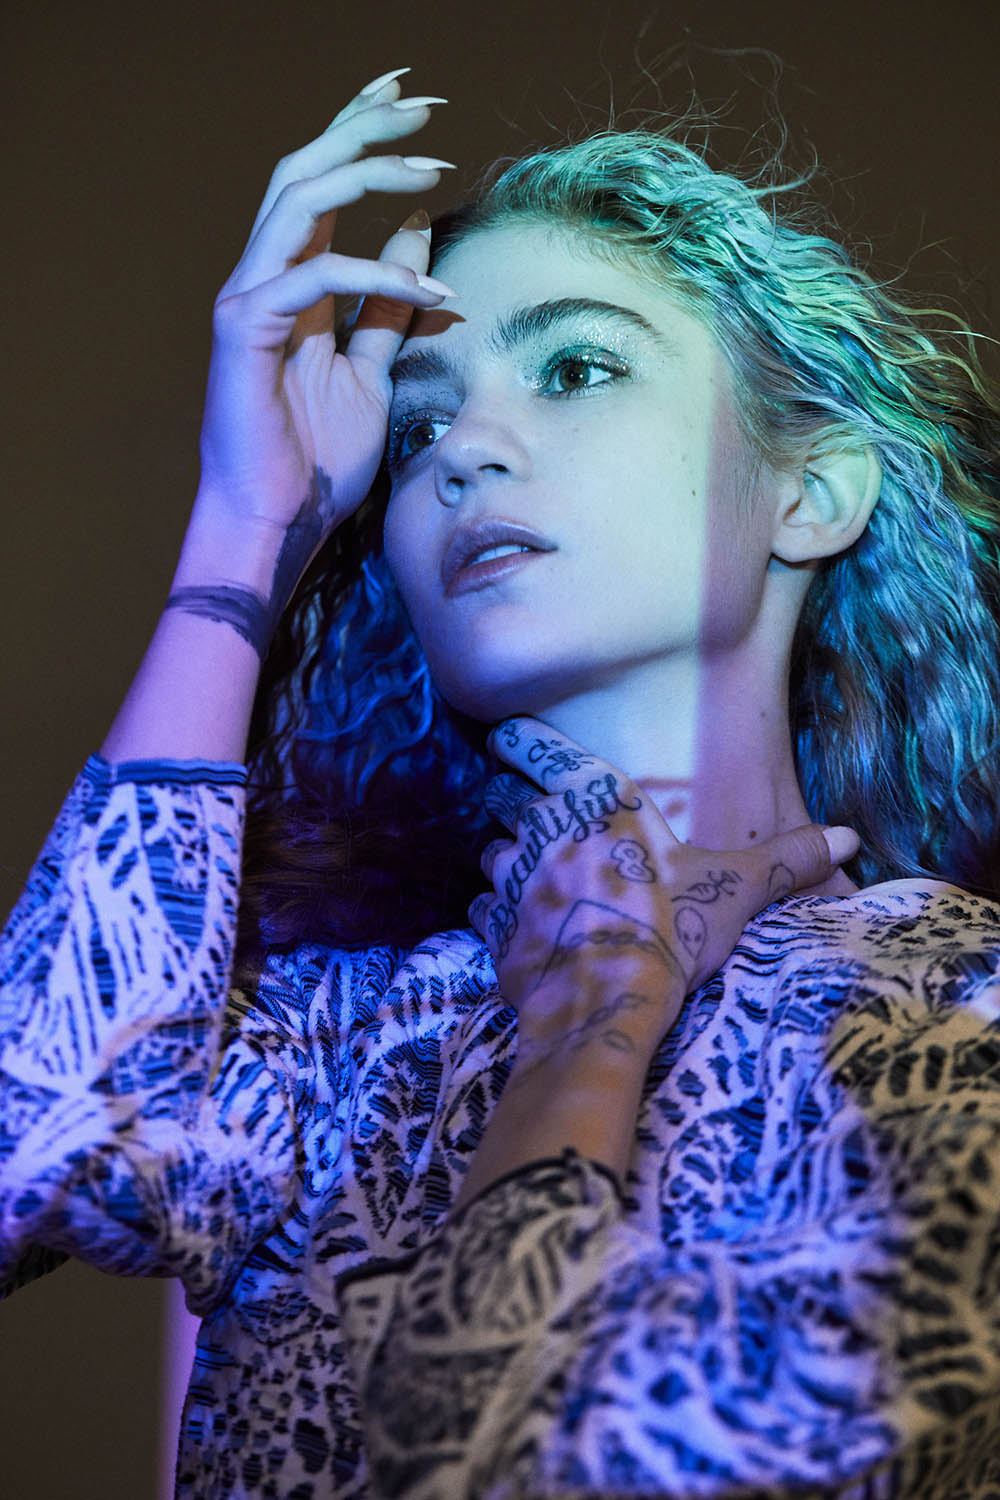 Grimes covers Flaunt Magazine Issue 165 by Zoey Grossman